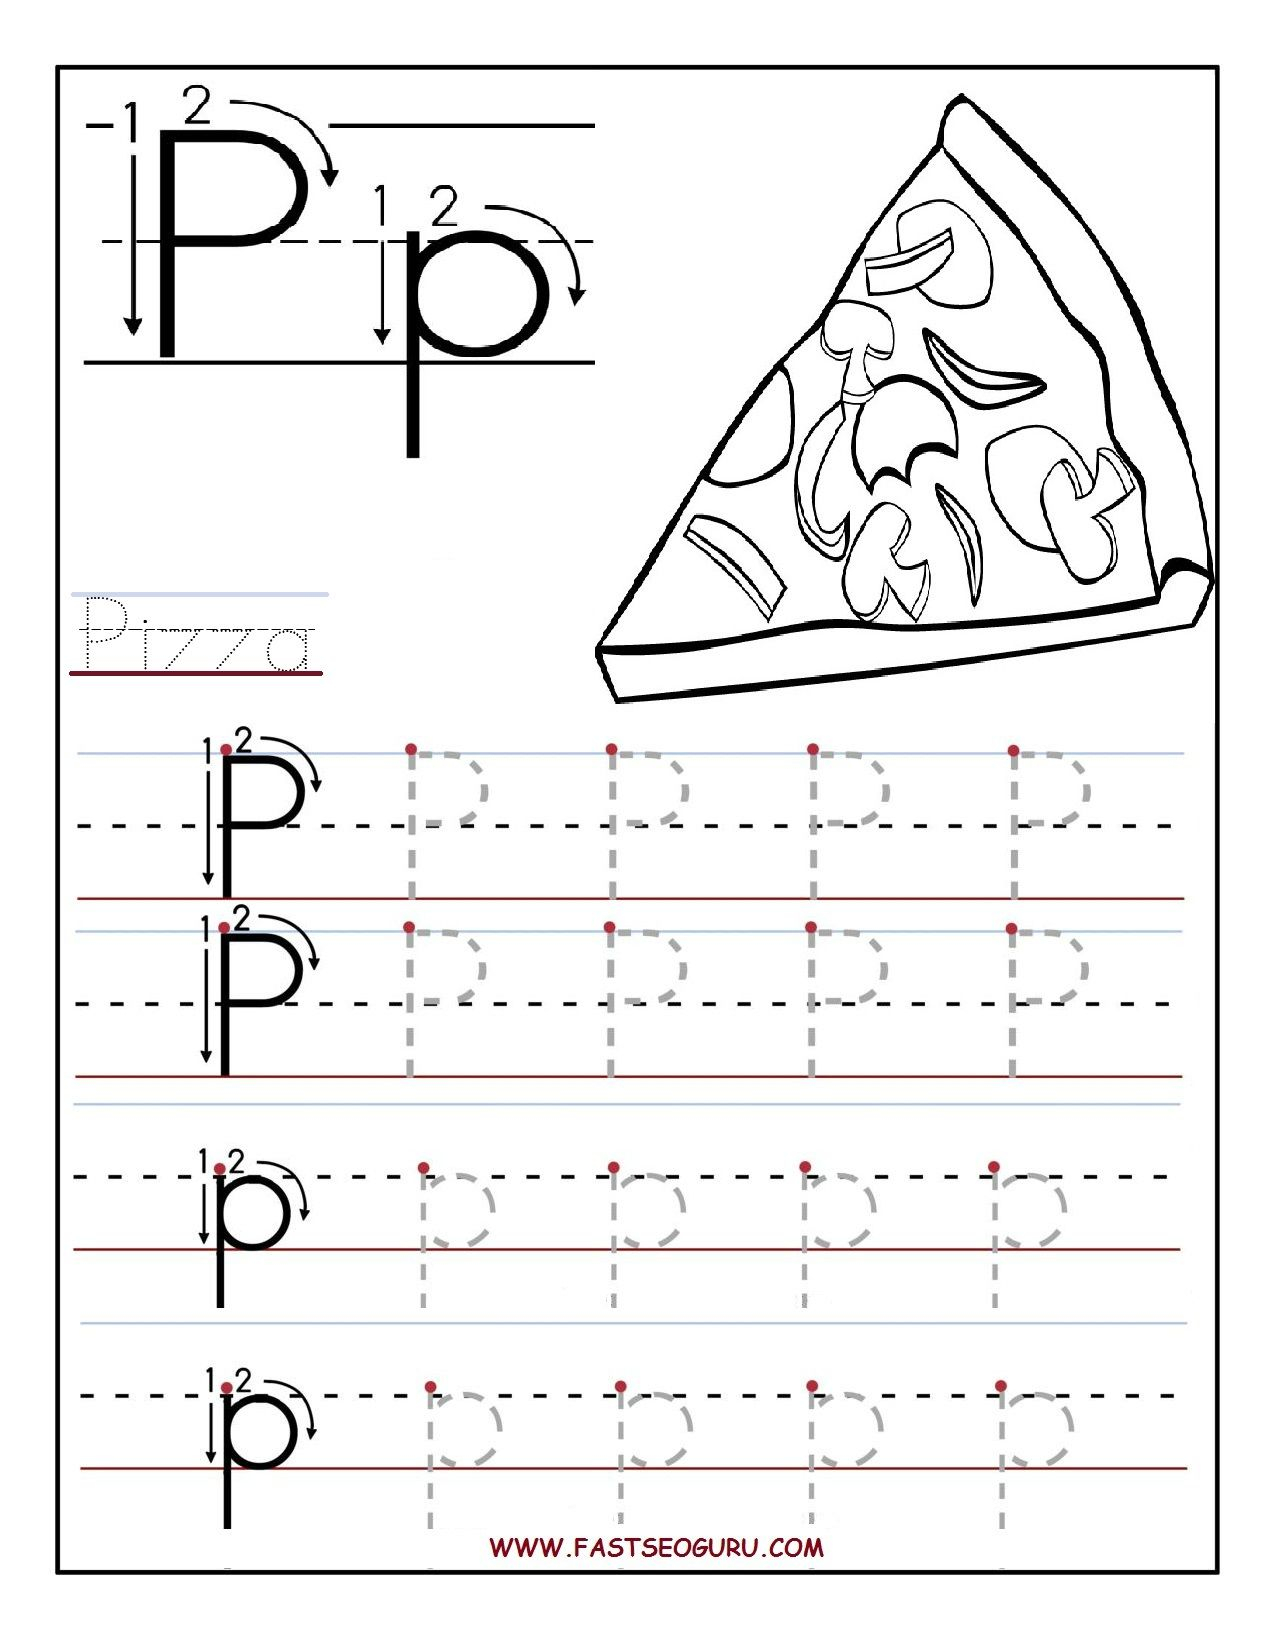 Printable Letter P Tracing Worksheets For Preschool within Letter P Tracing For Preschool